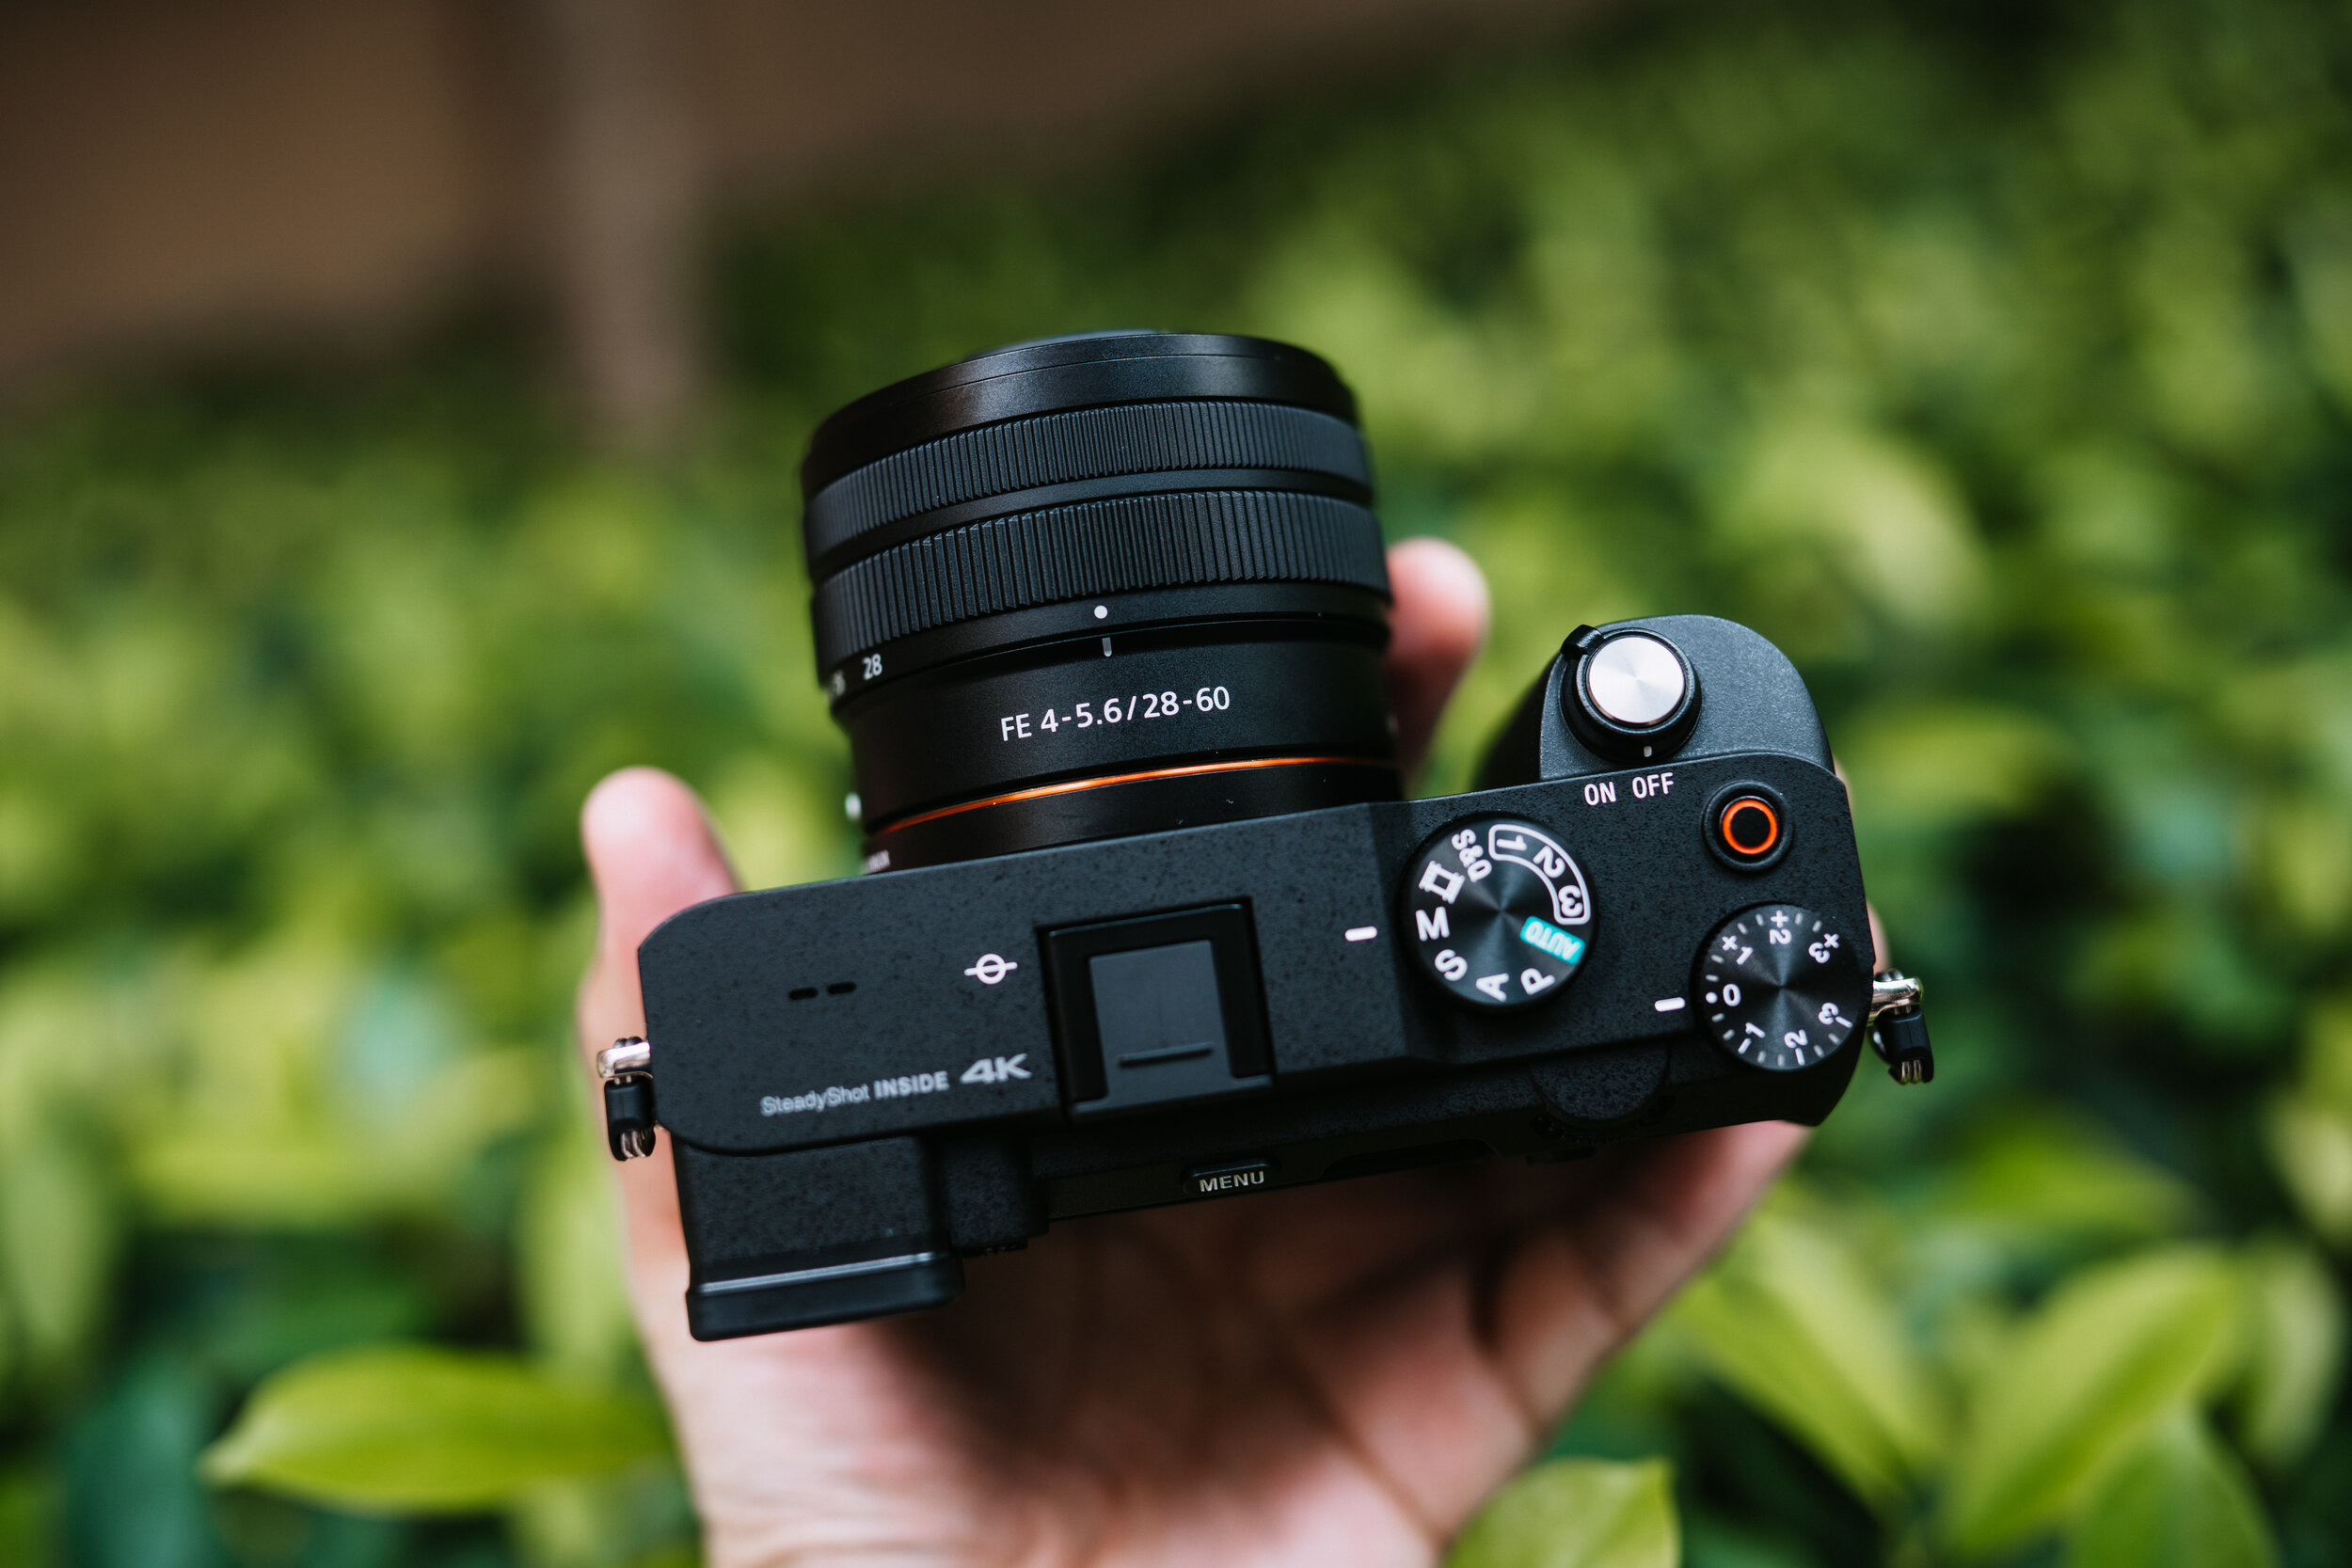 Hands-on] Sony FE 28-60mm f/4-5.6 - The New Standard — J.K.